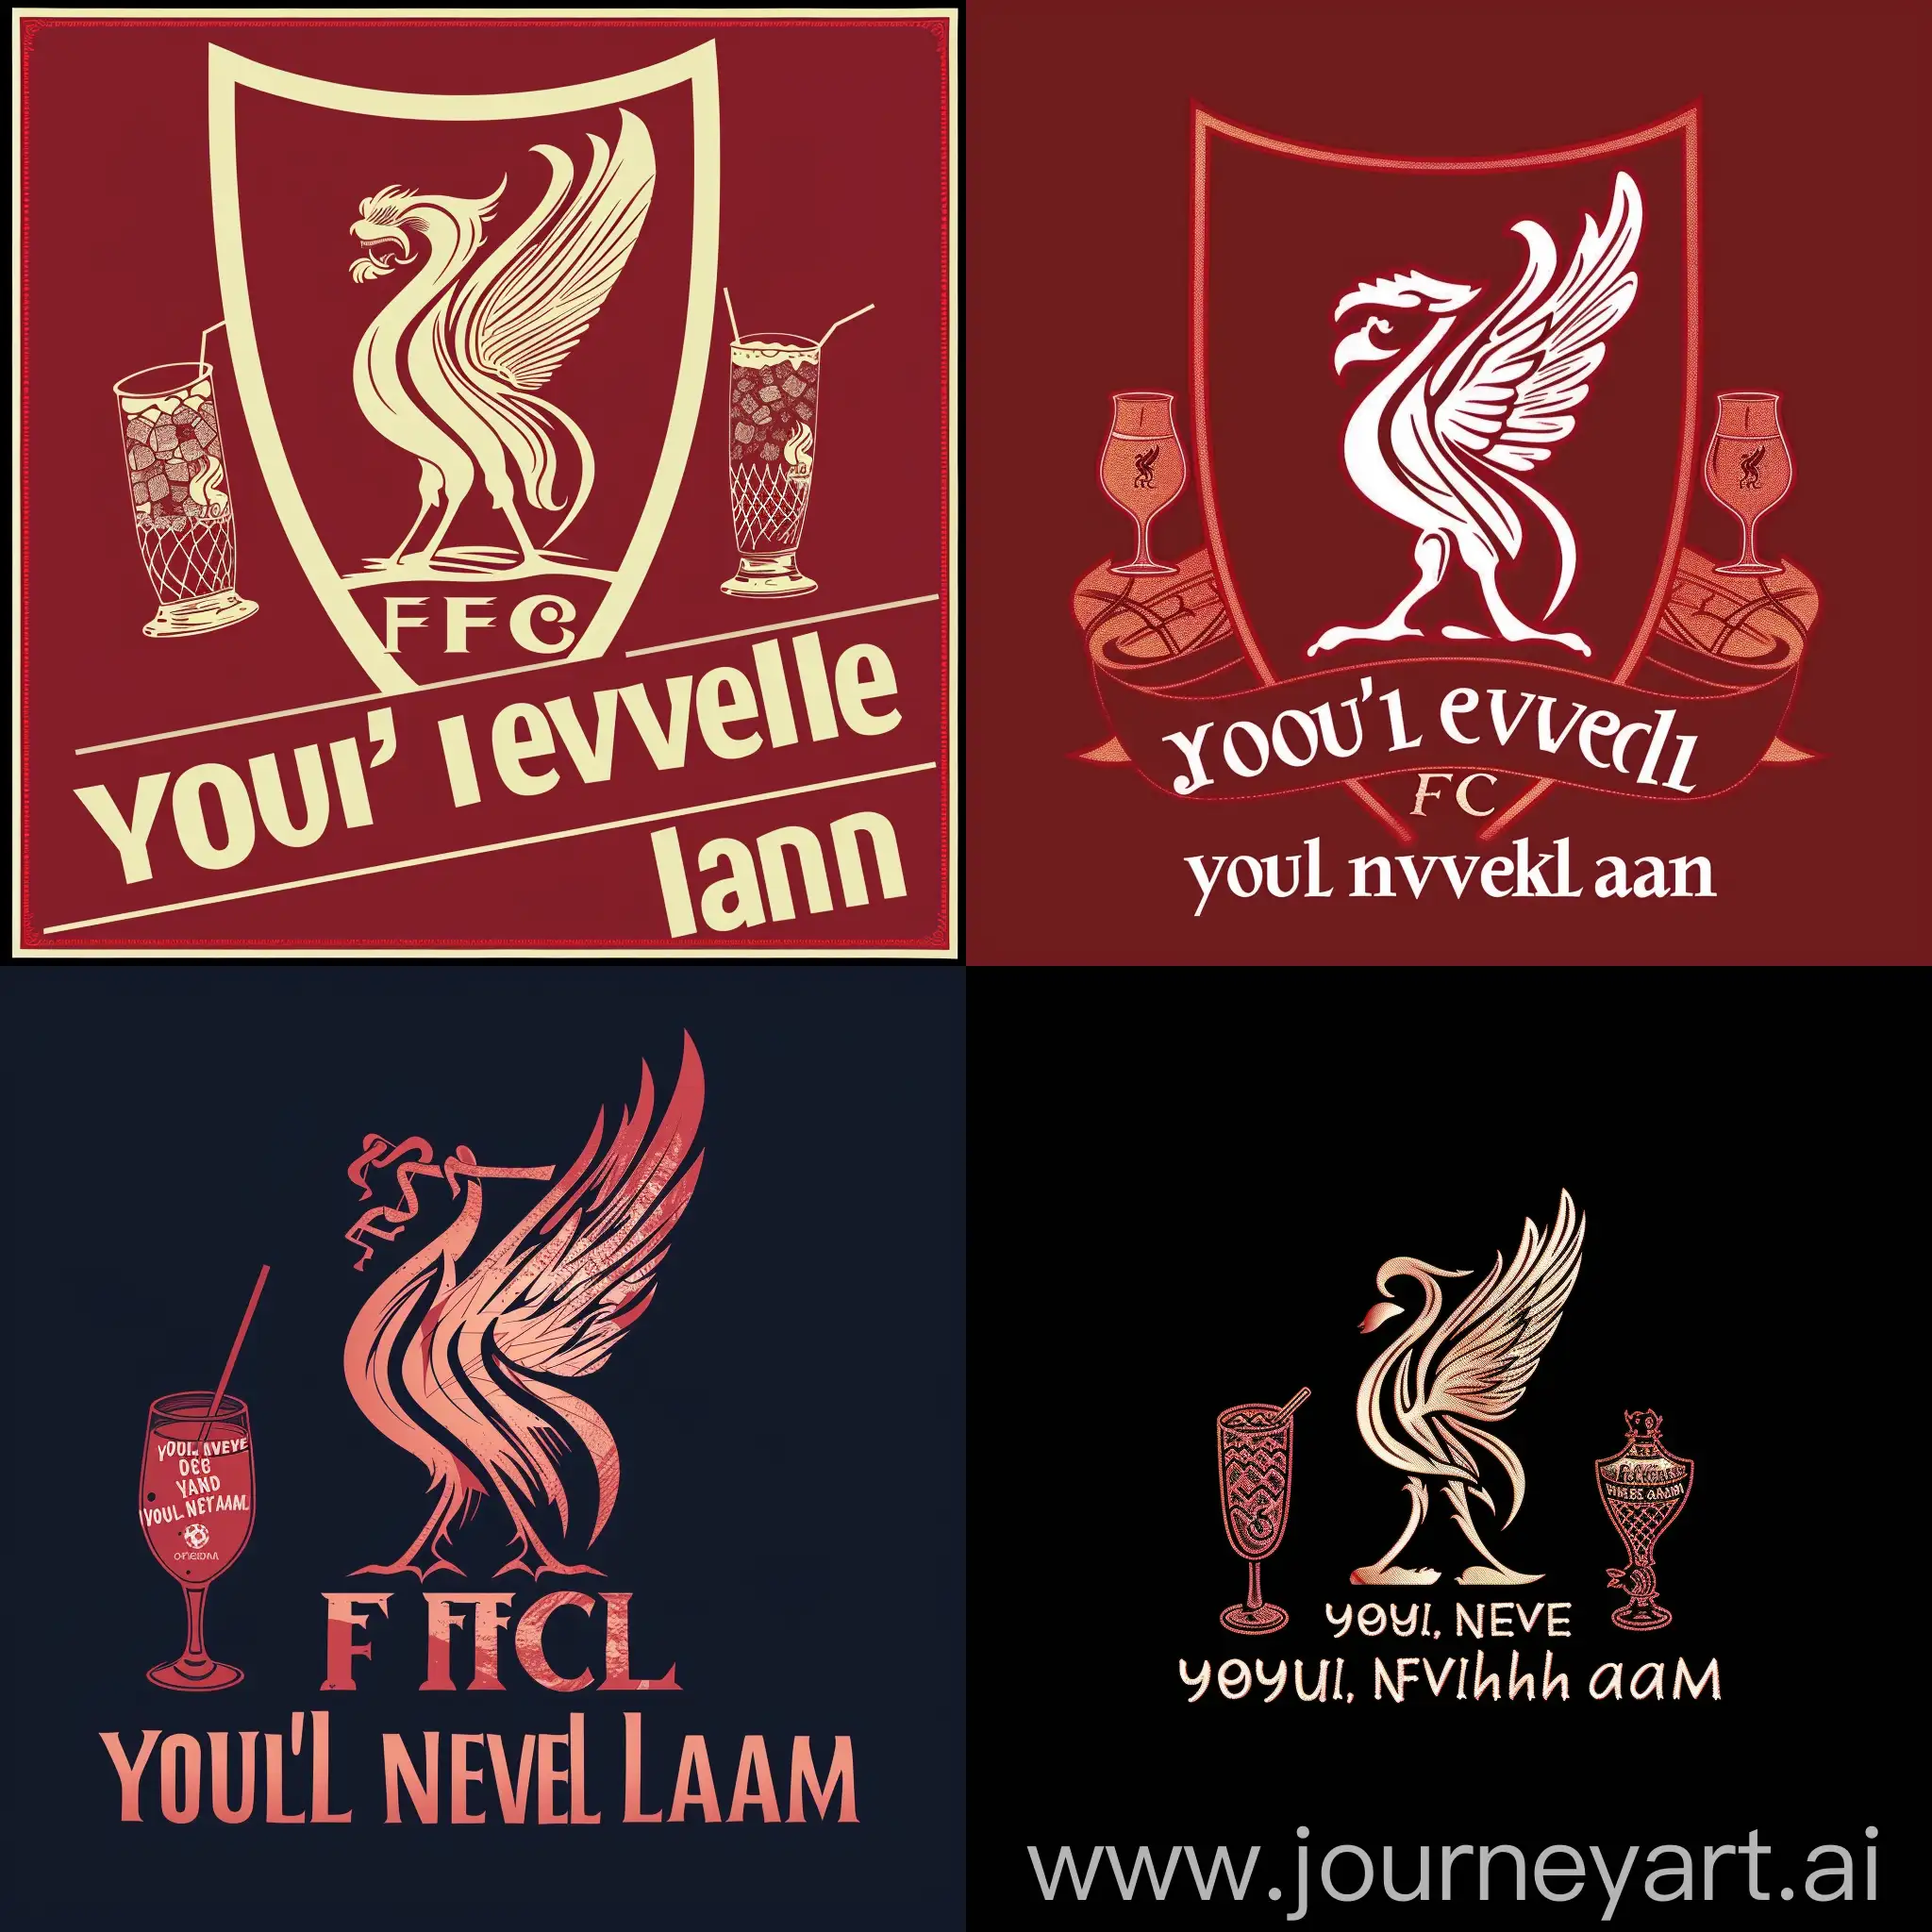 generate custom liverpool fc logo with text `you'll never drink alone` instead of you'll never walk alone